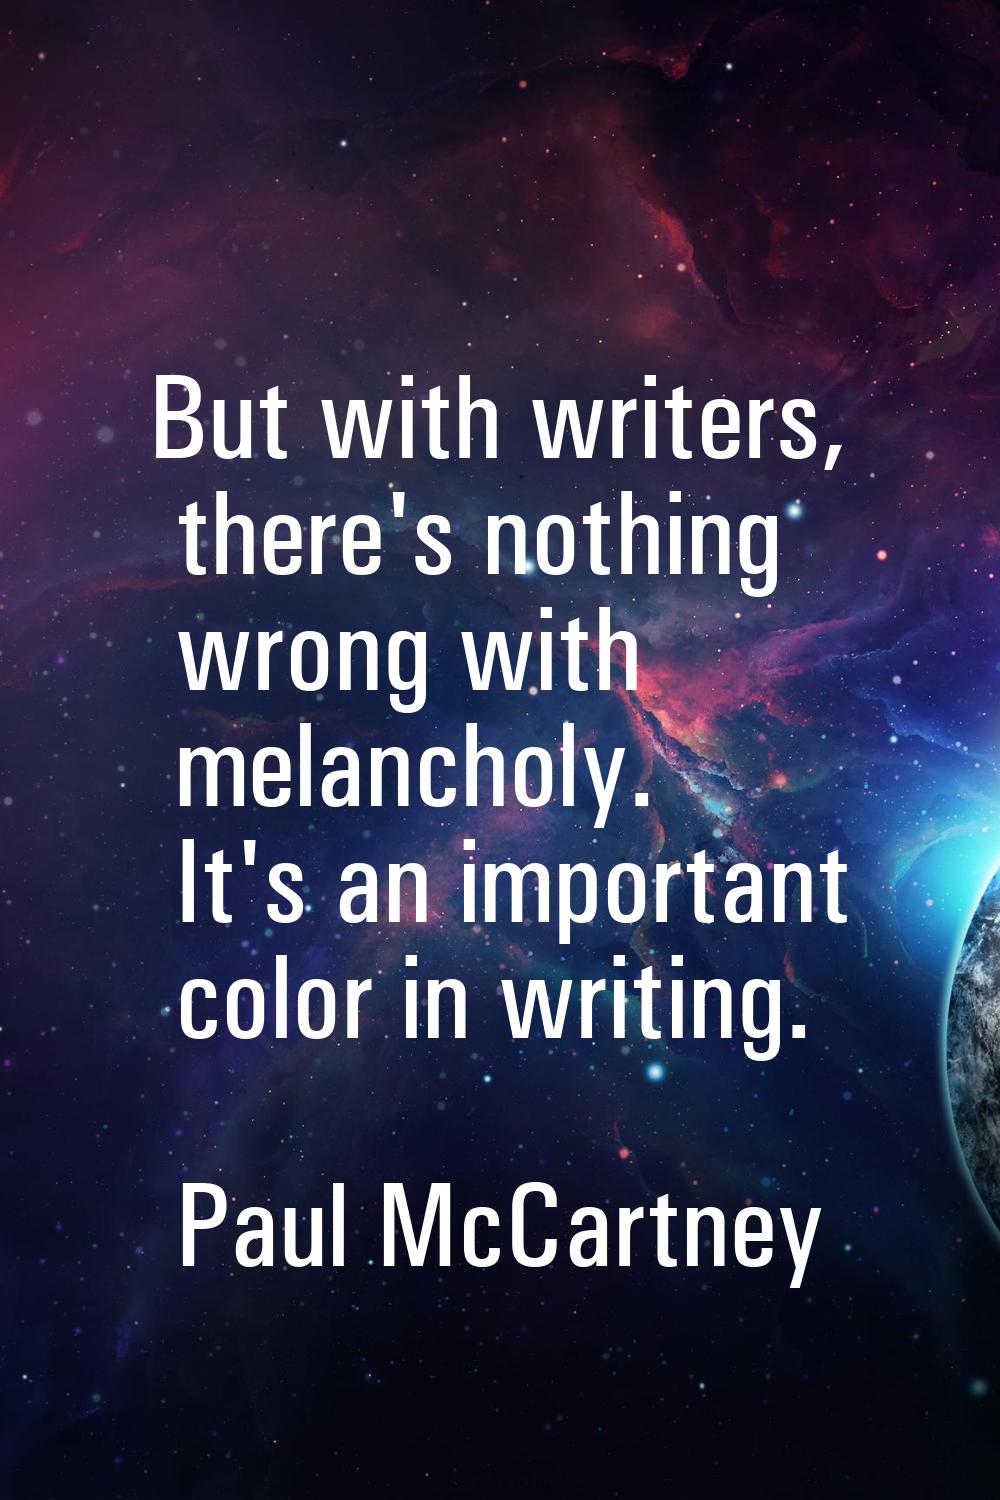 But with writers, there's nothing wrong with melancholy. It's an important color in writing.